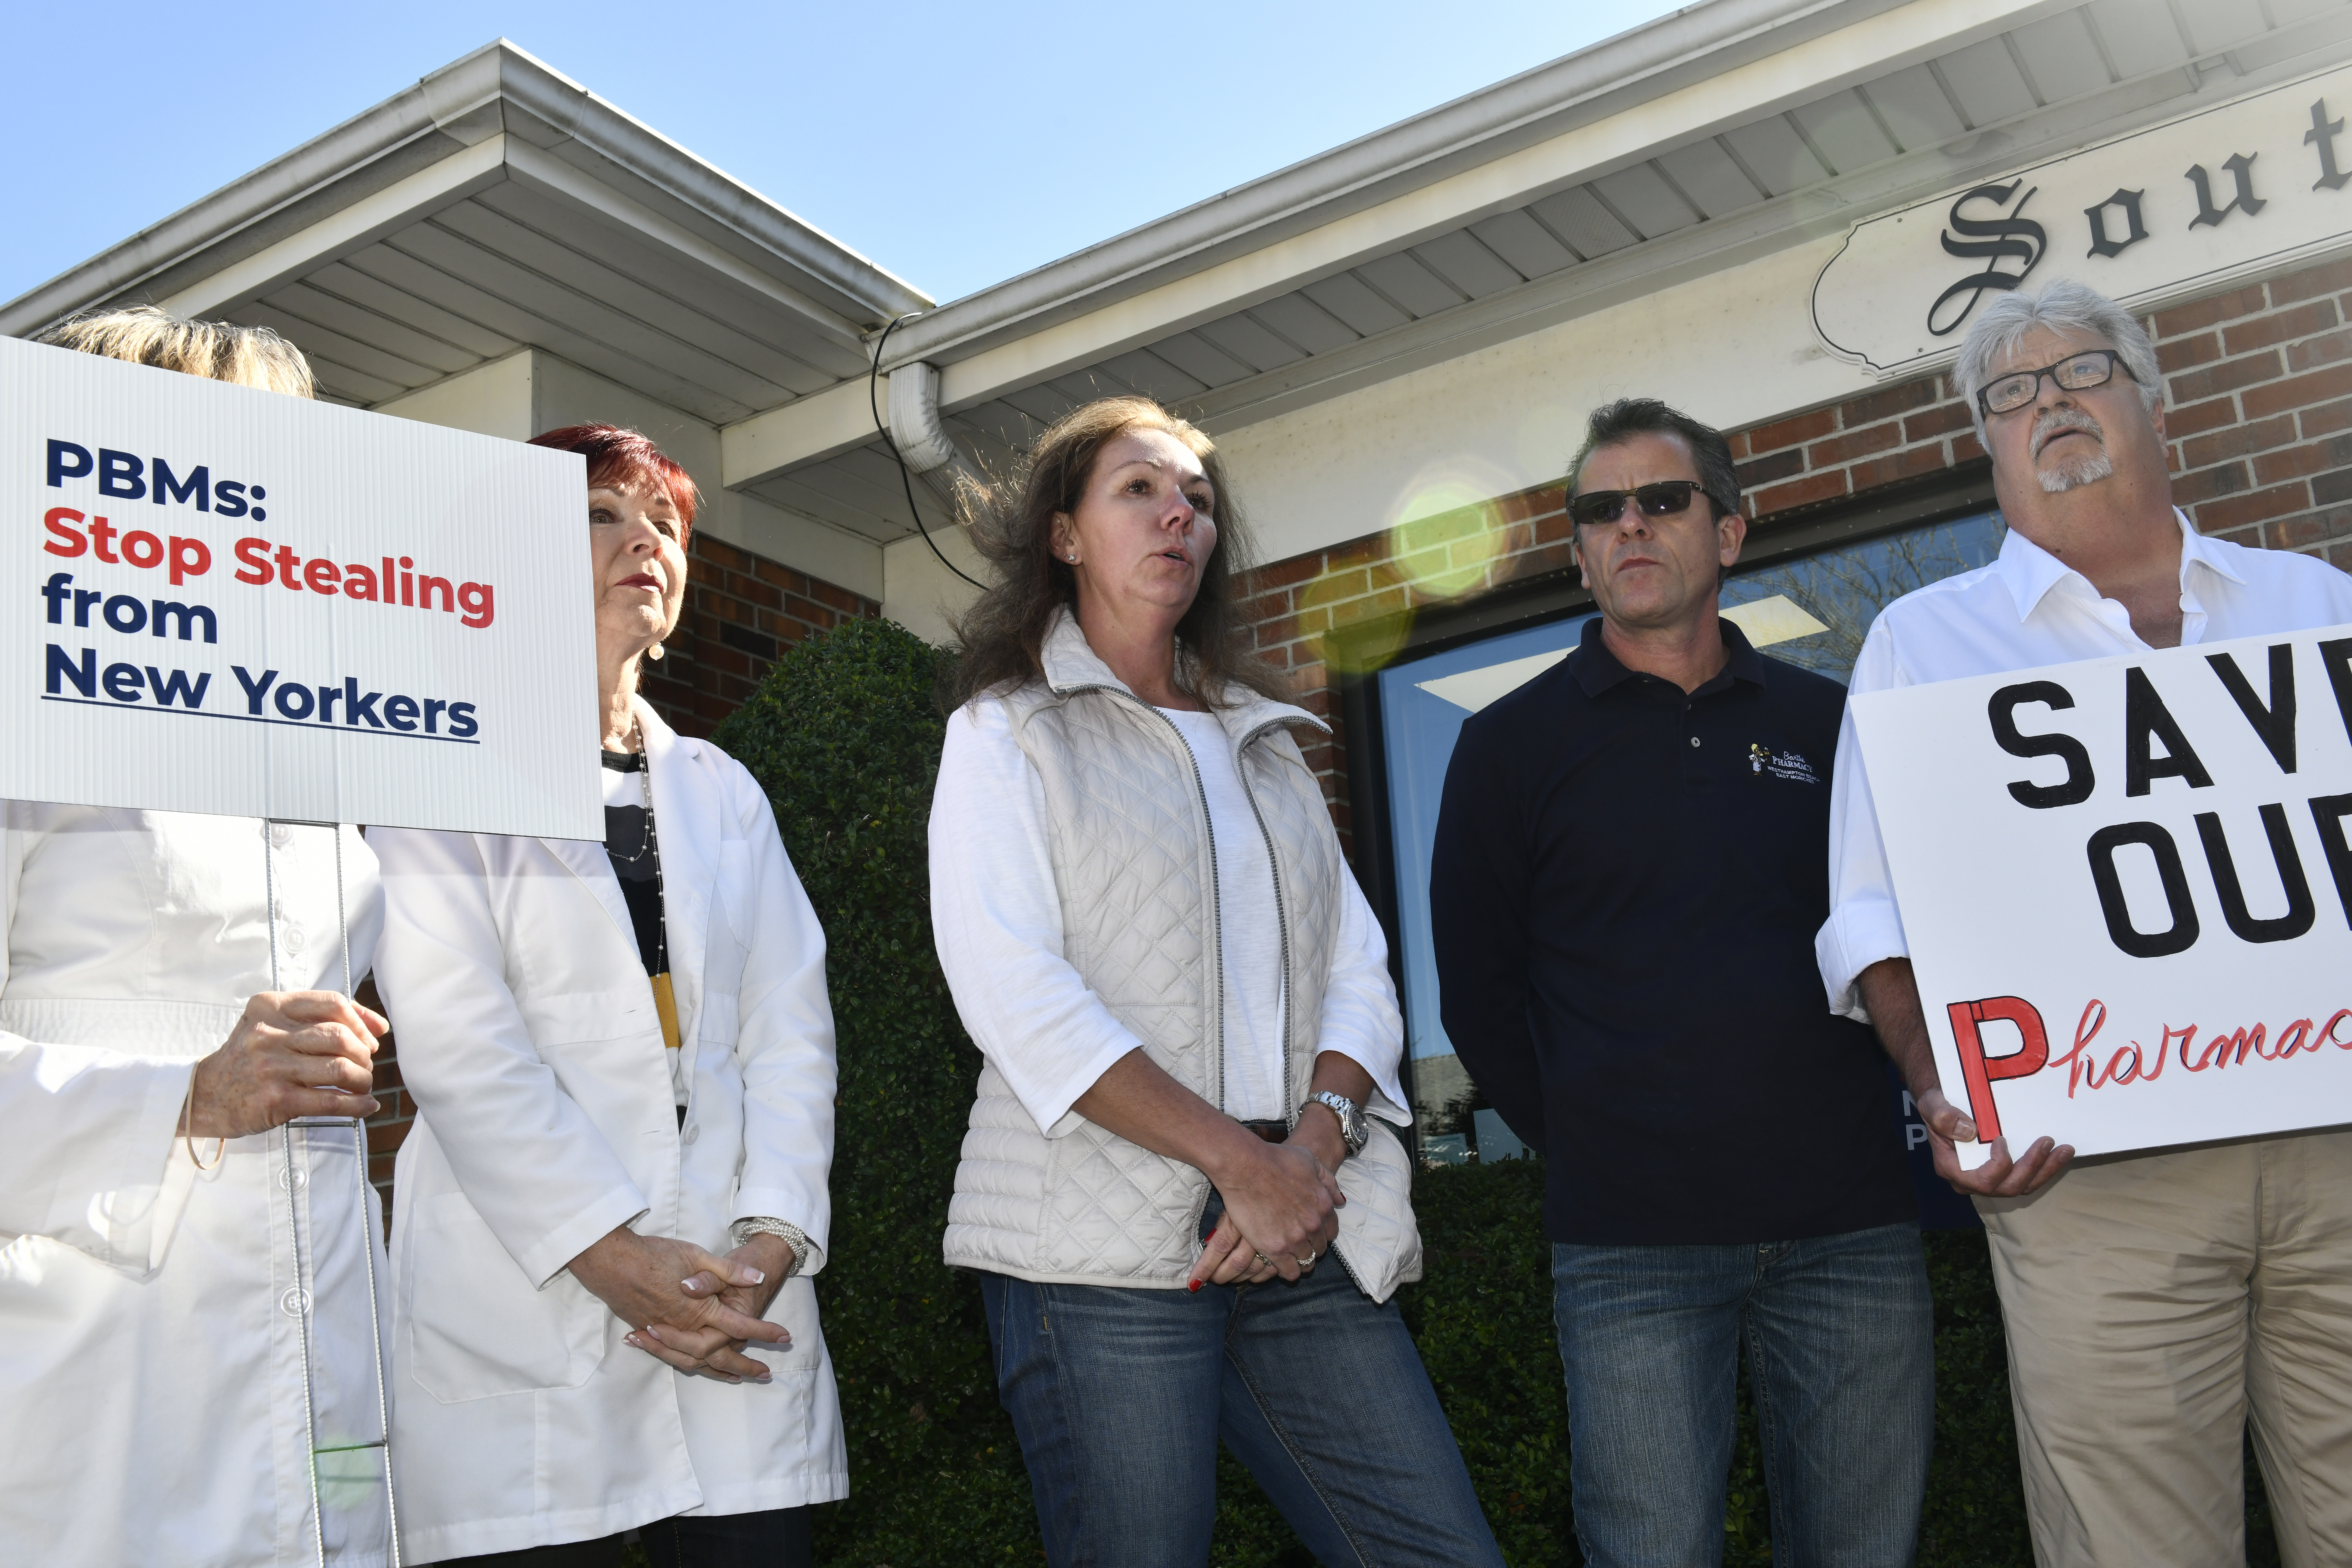 Sag Harbor Pharmacy owner Janice D'Angelo speaks at a rally against PBMs at Southrifty Drugs in Southampton Village on Wednesday, October 23. DANA SHAW